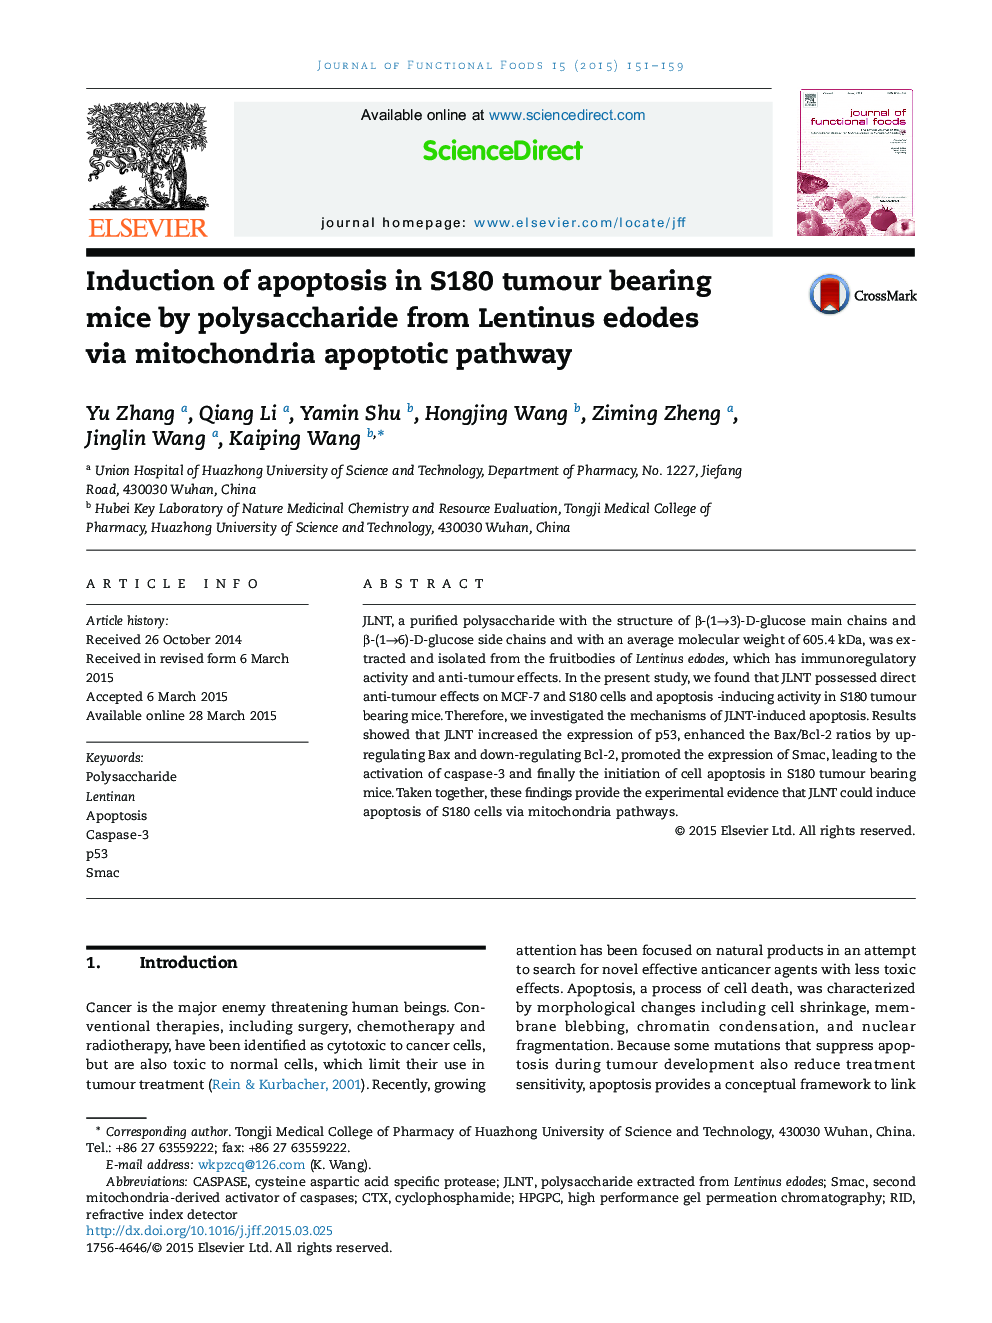 Induction of apoptosis in S180 tumour bearing mice by polysaccharide from Lentinus edodes via mitochondria apoptotic pathway